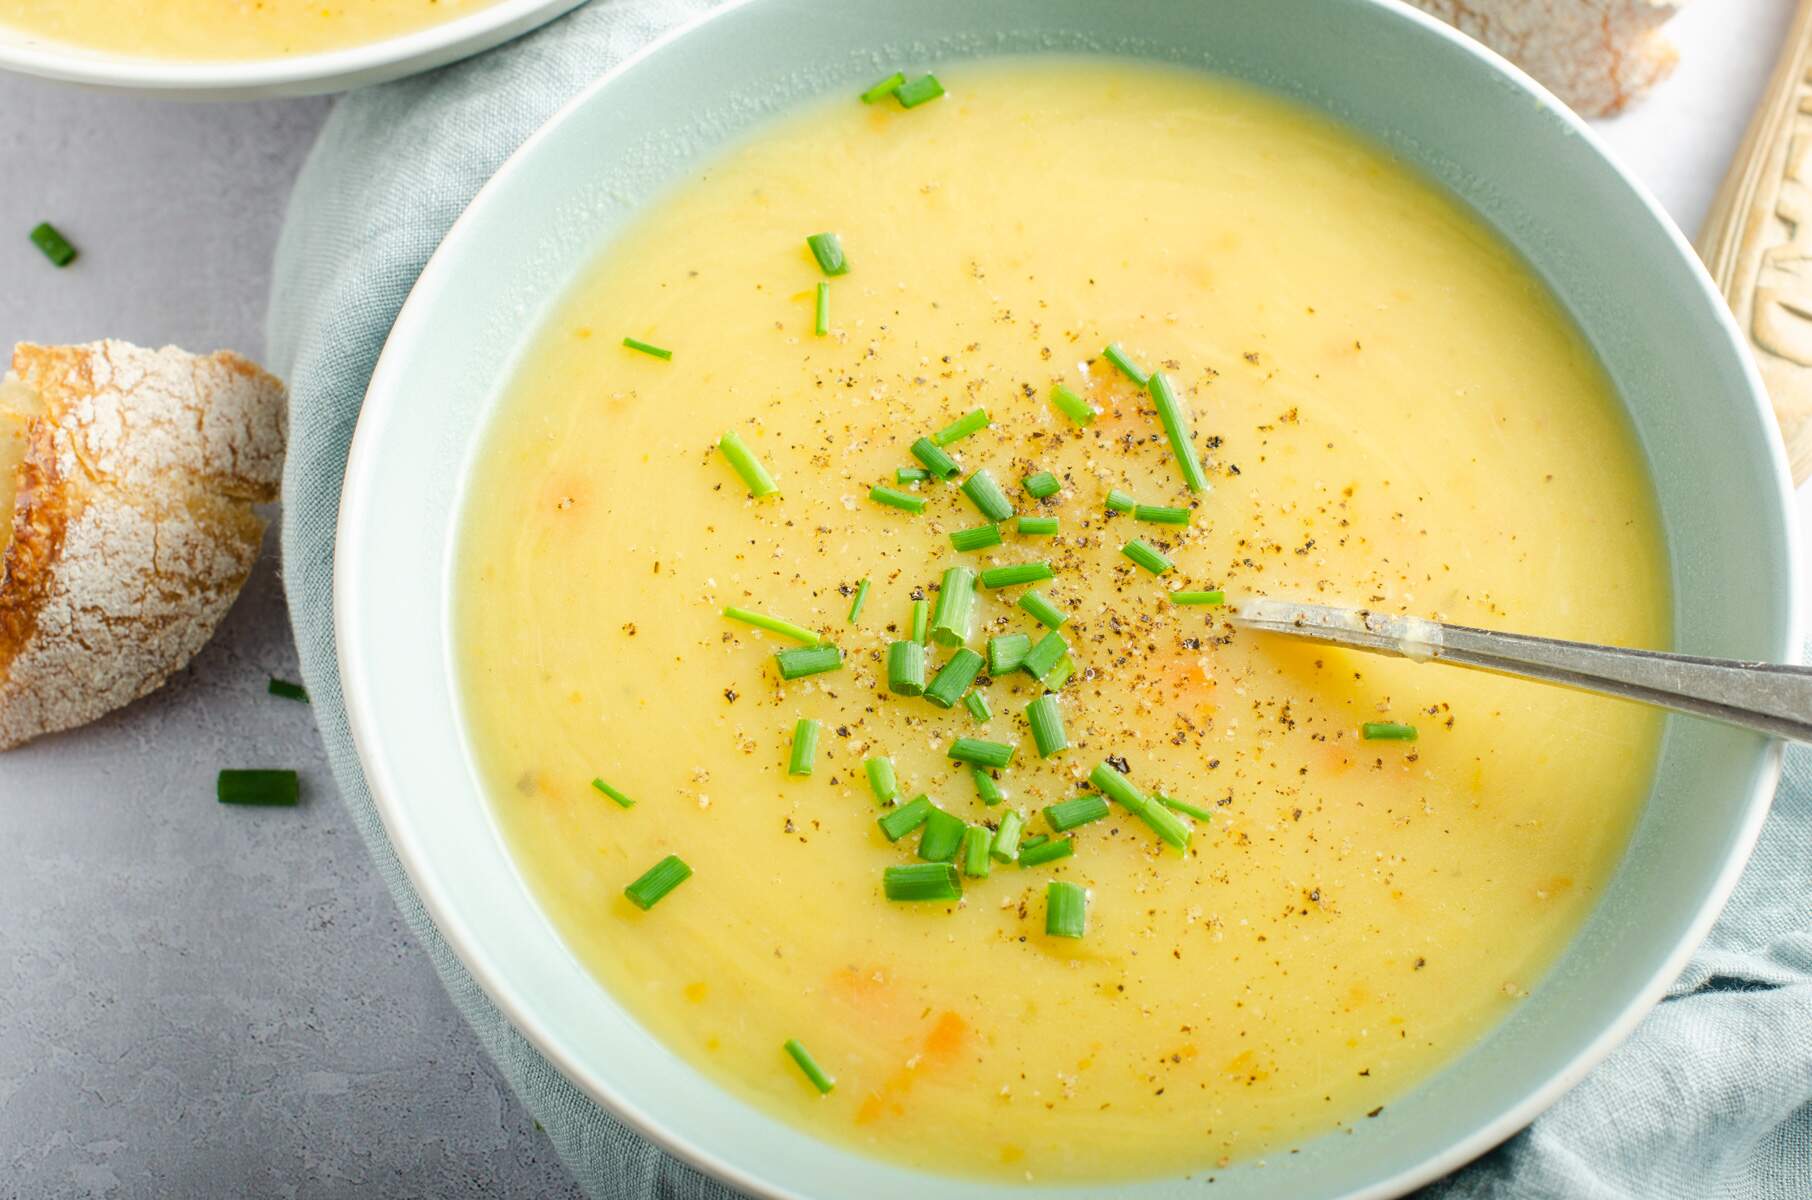 A warming bowl of leek and potato soup with some crusty bread and topped with fresh chopped chives.